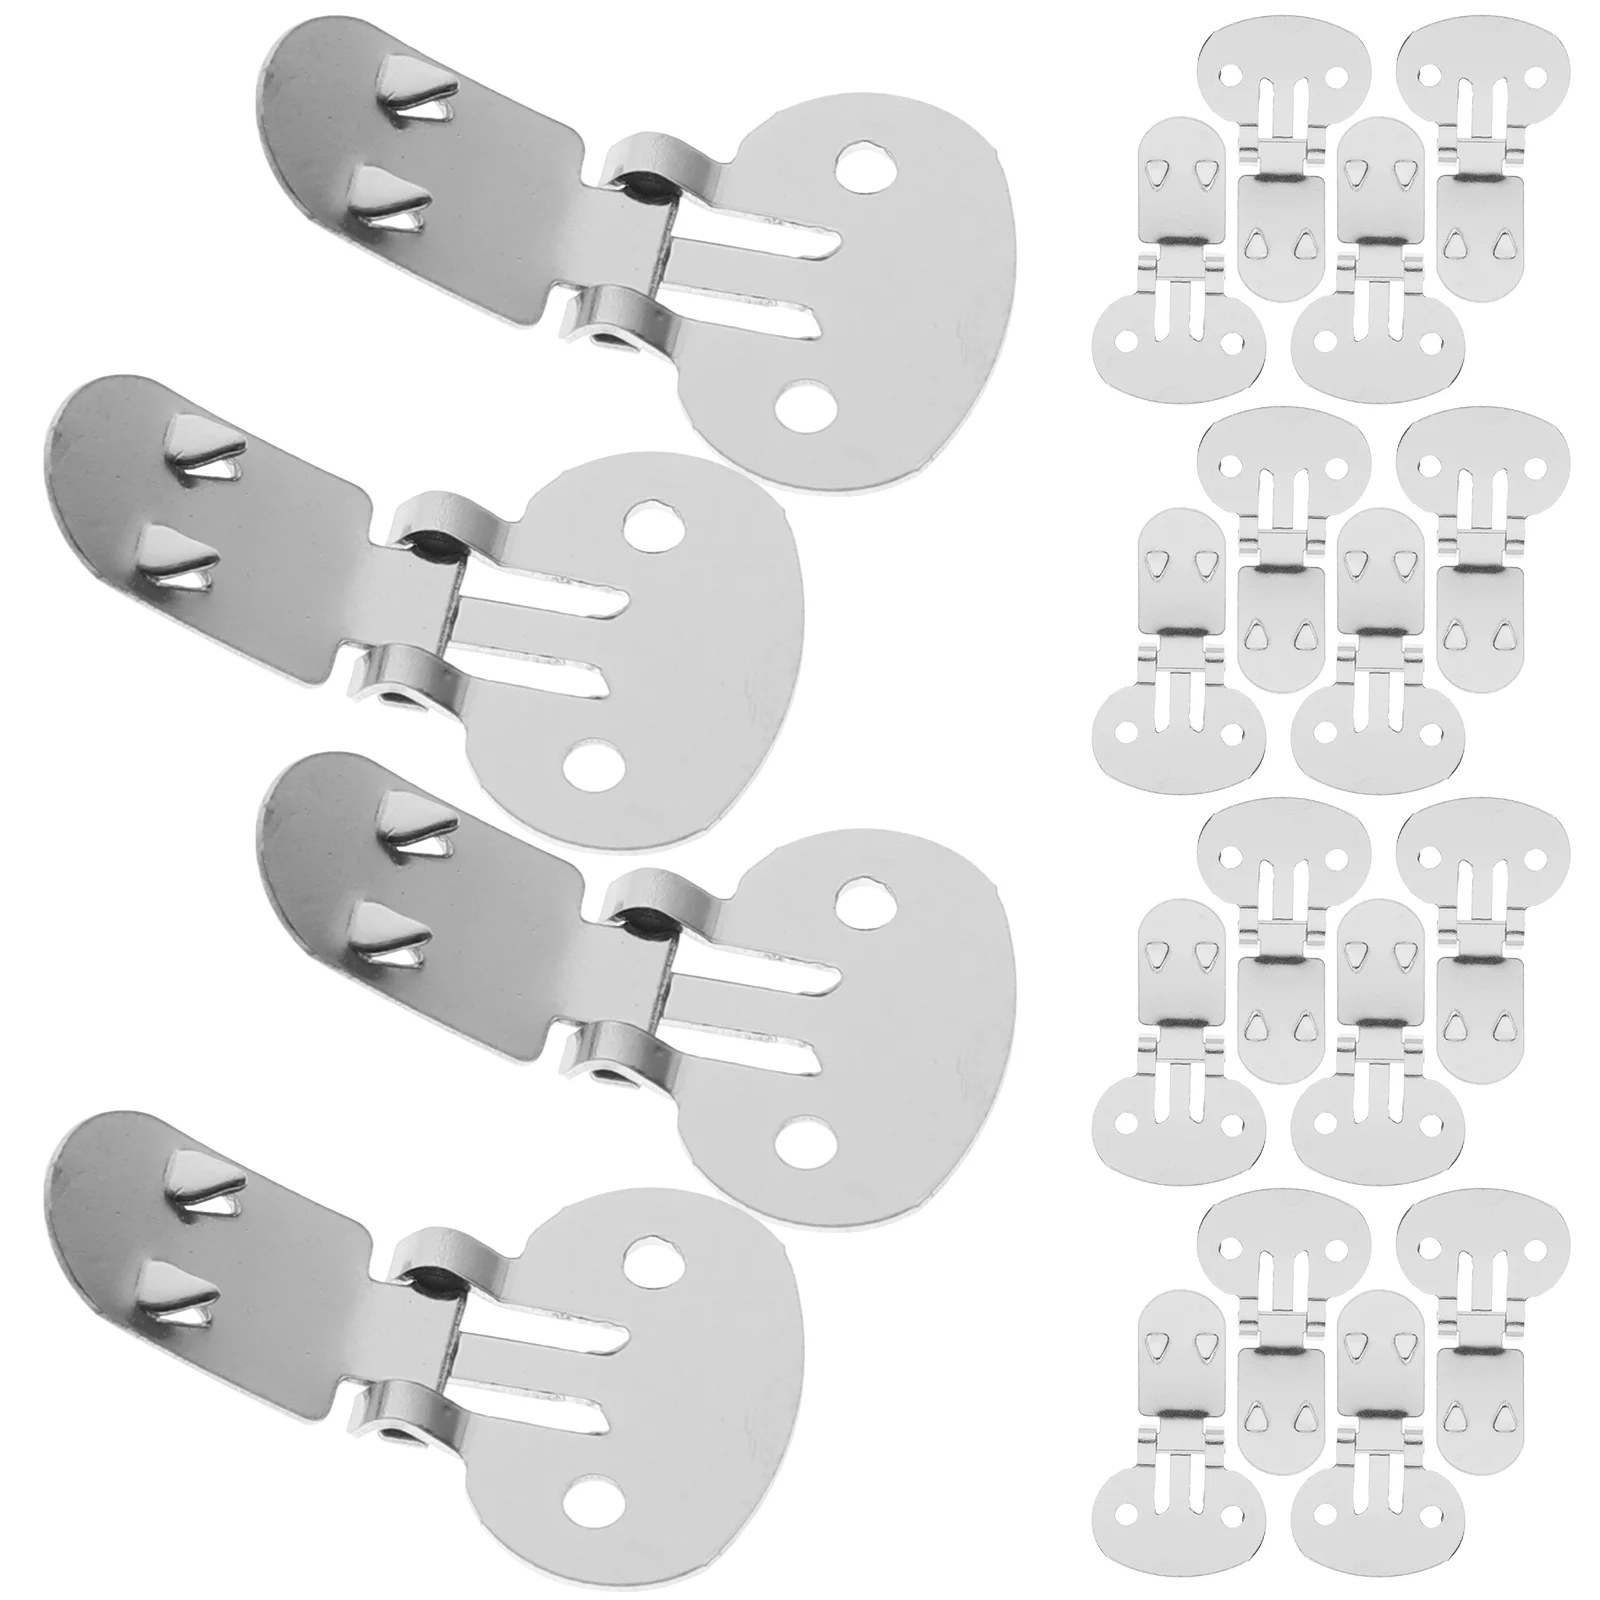 

20pcs Stainless Steel Blank Shoe Clips DIY Crafts Folding Buckles Findings Accessories (Large Size)